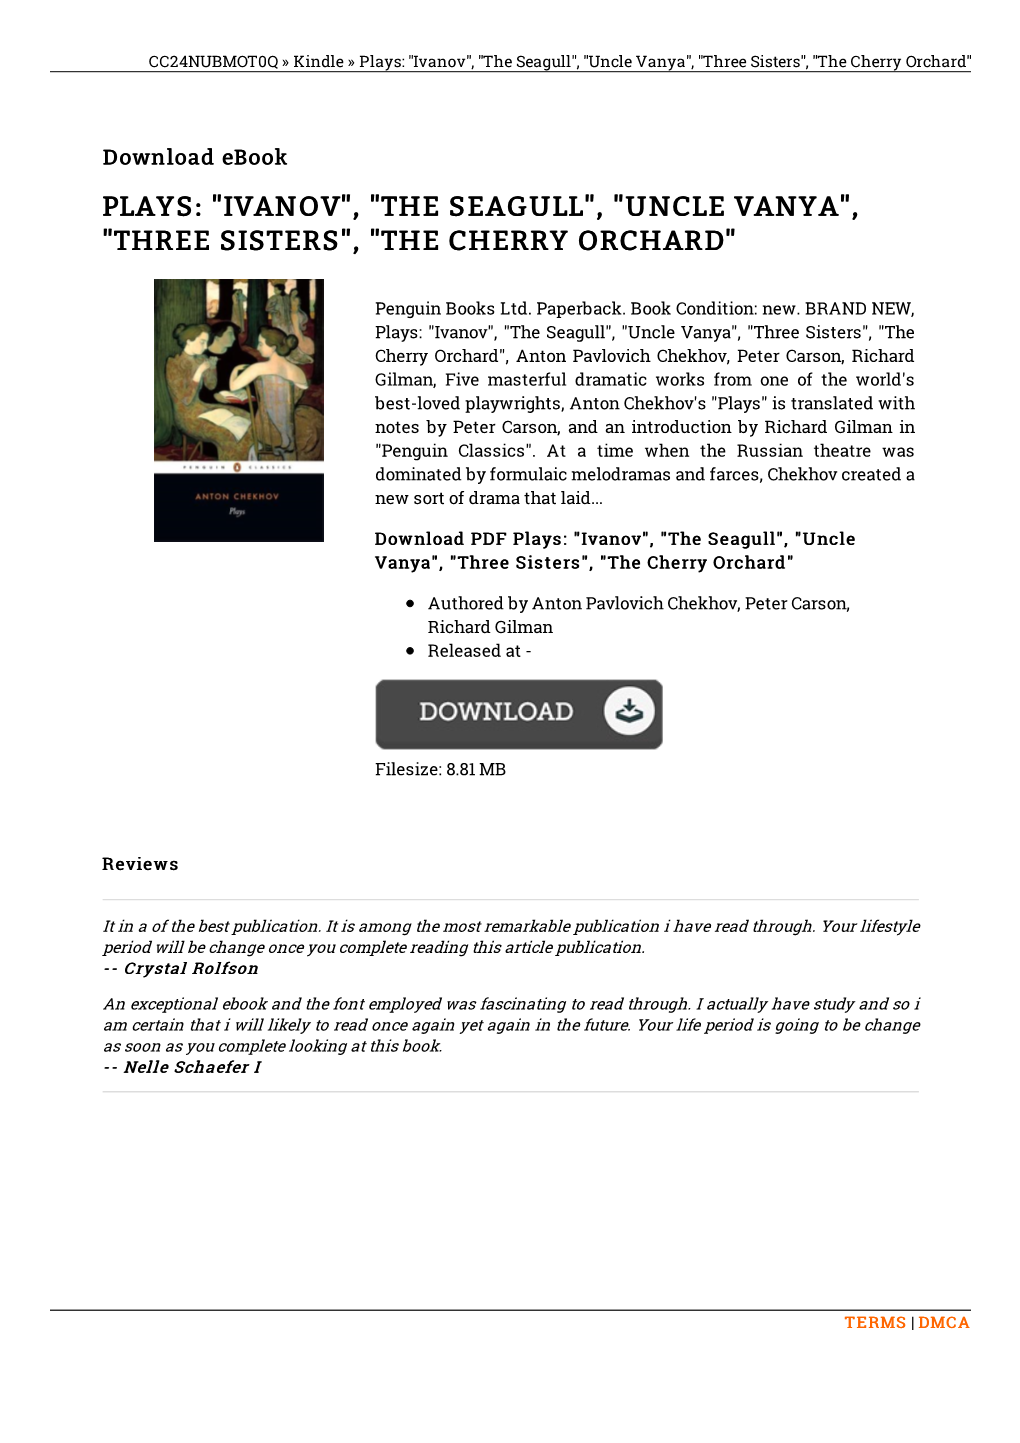 Download PDF &gt; Plays: "Ivanov", "The Seagull", "Uncle Vanya